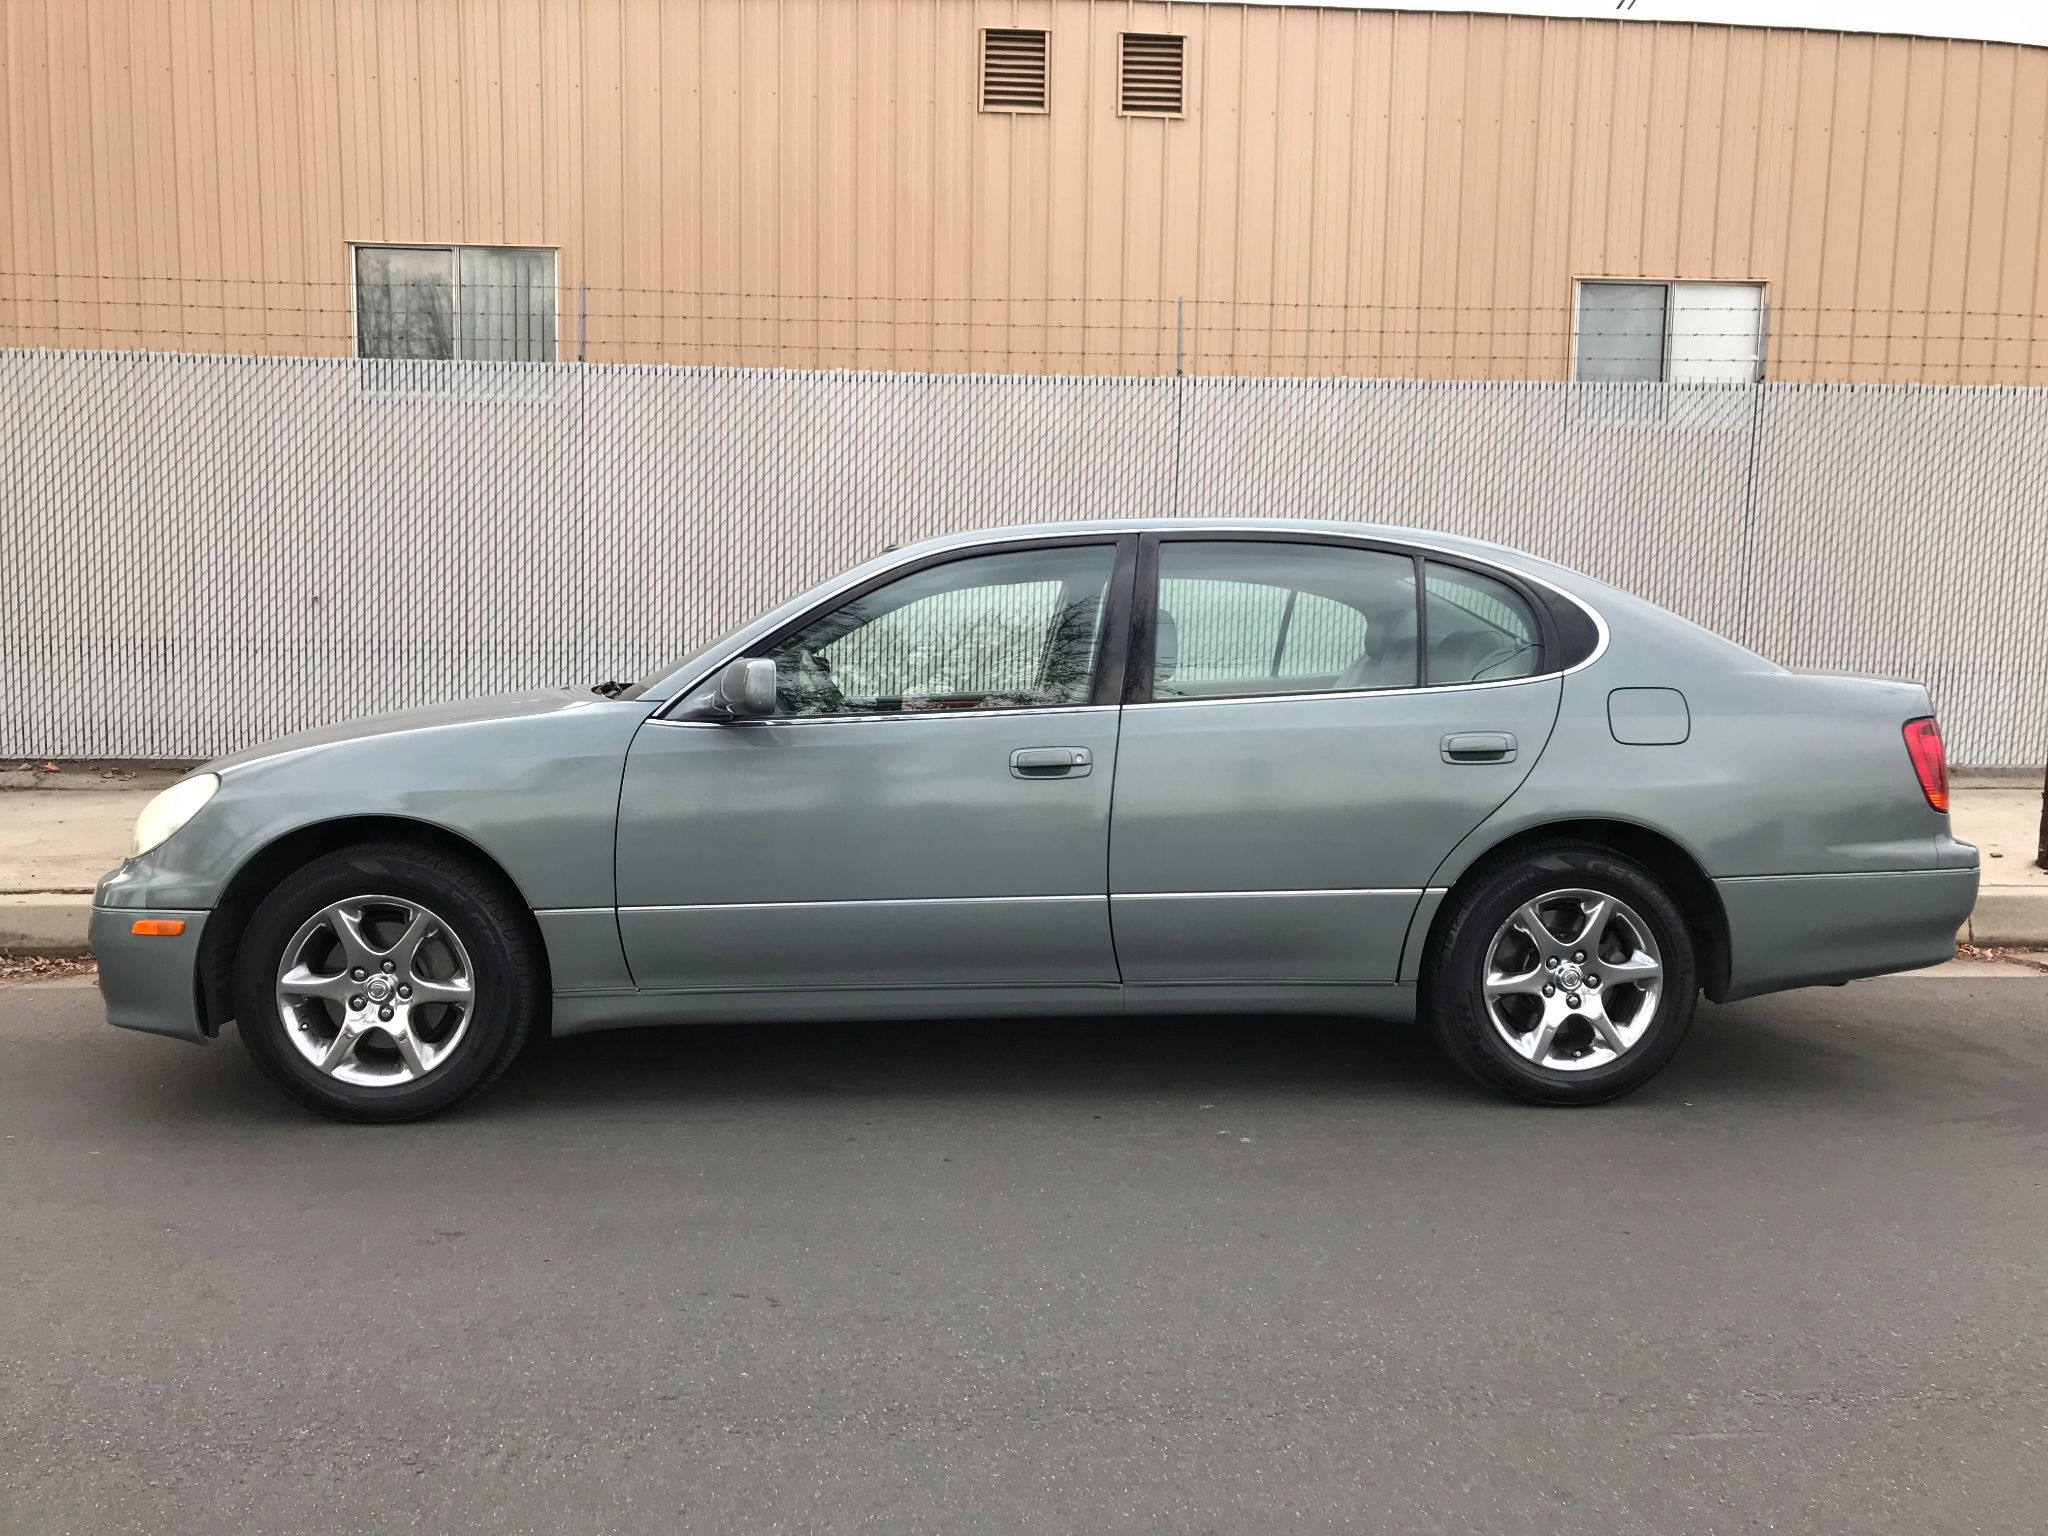 Used 2002 Lexus GS 300 GLS at City Cars Warehouse INC